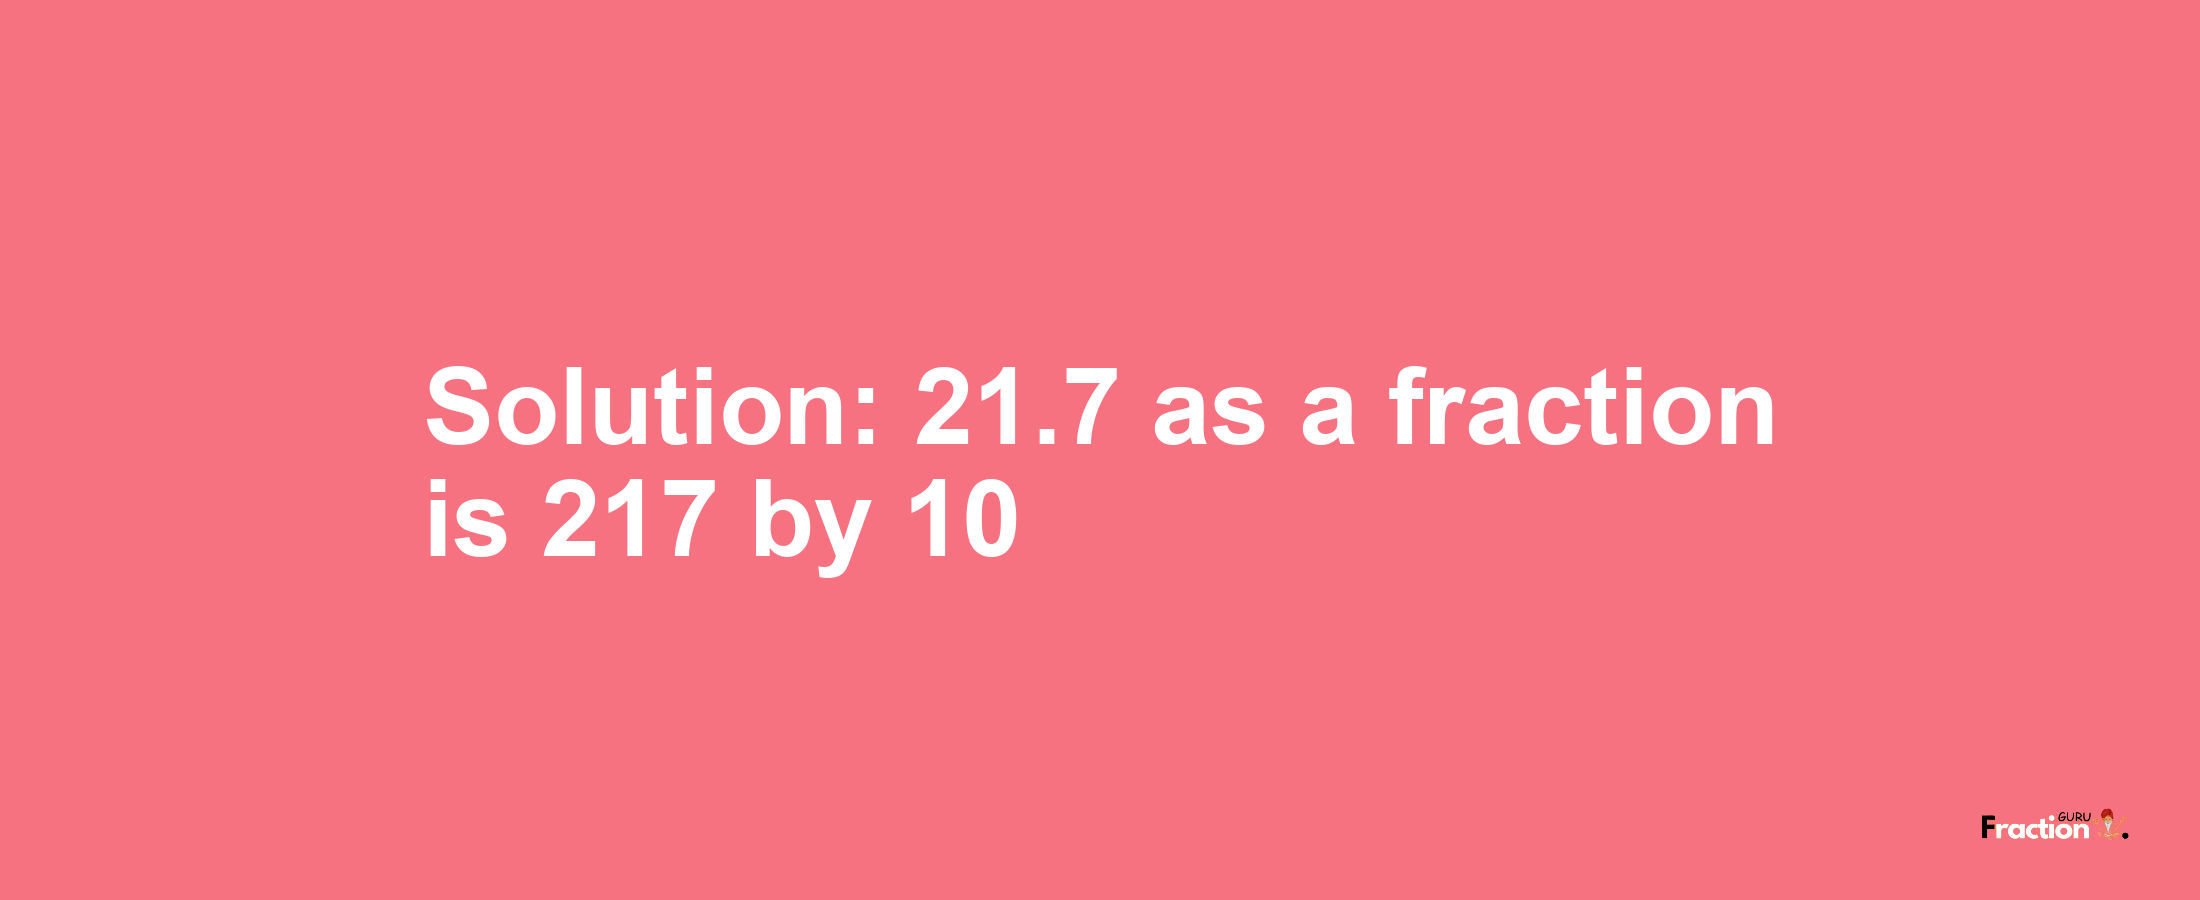 Solution:21.7 as a fraction is 217/10